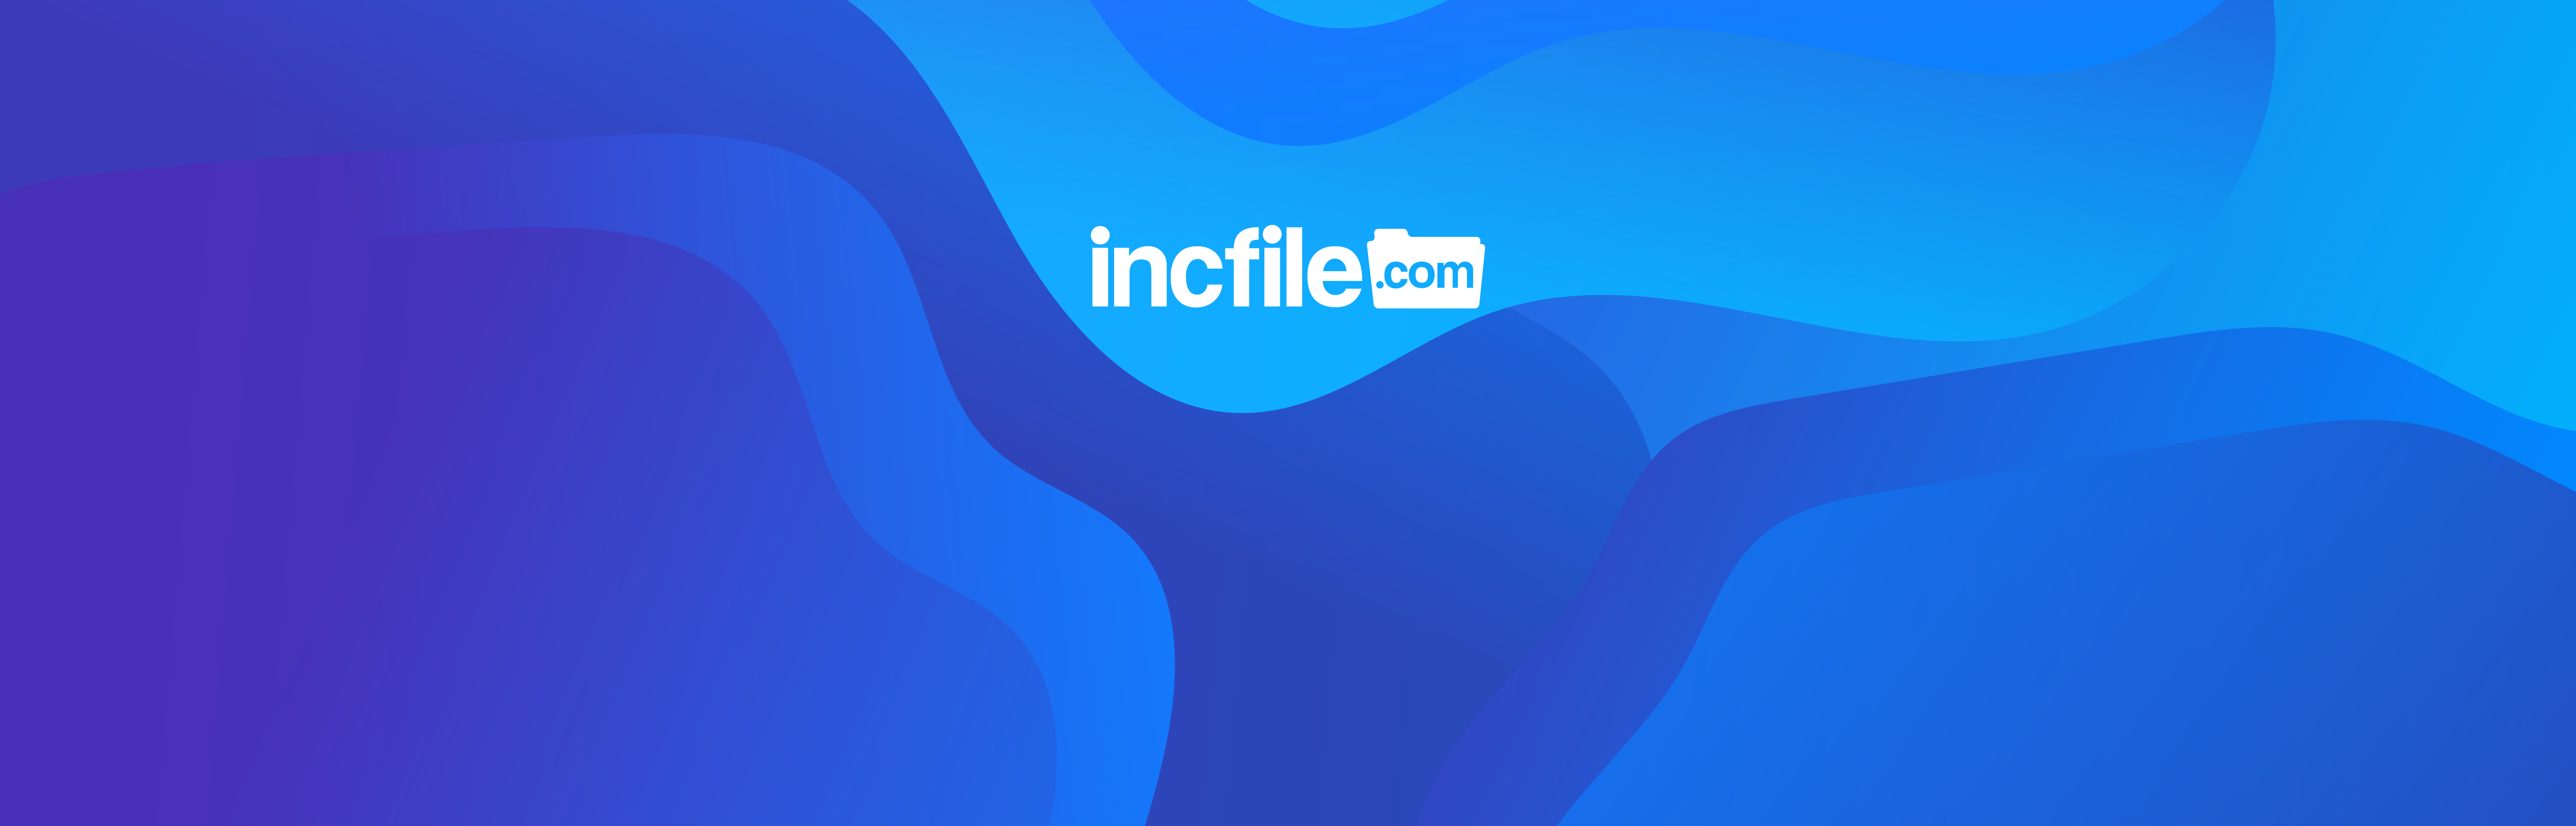 Incfile How To Cancel Account